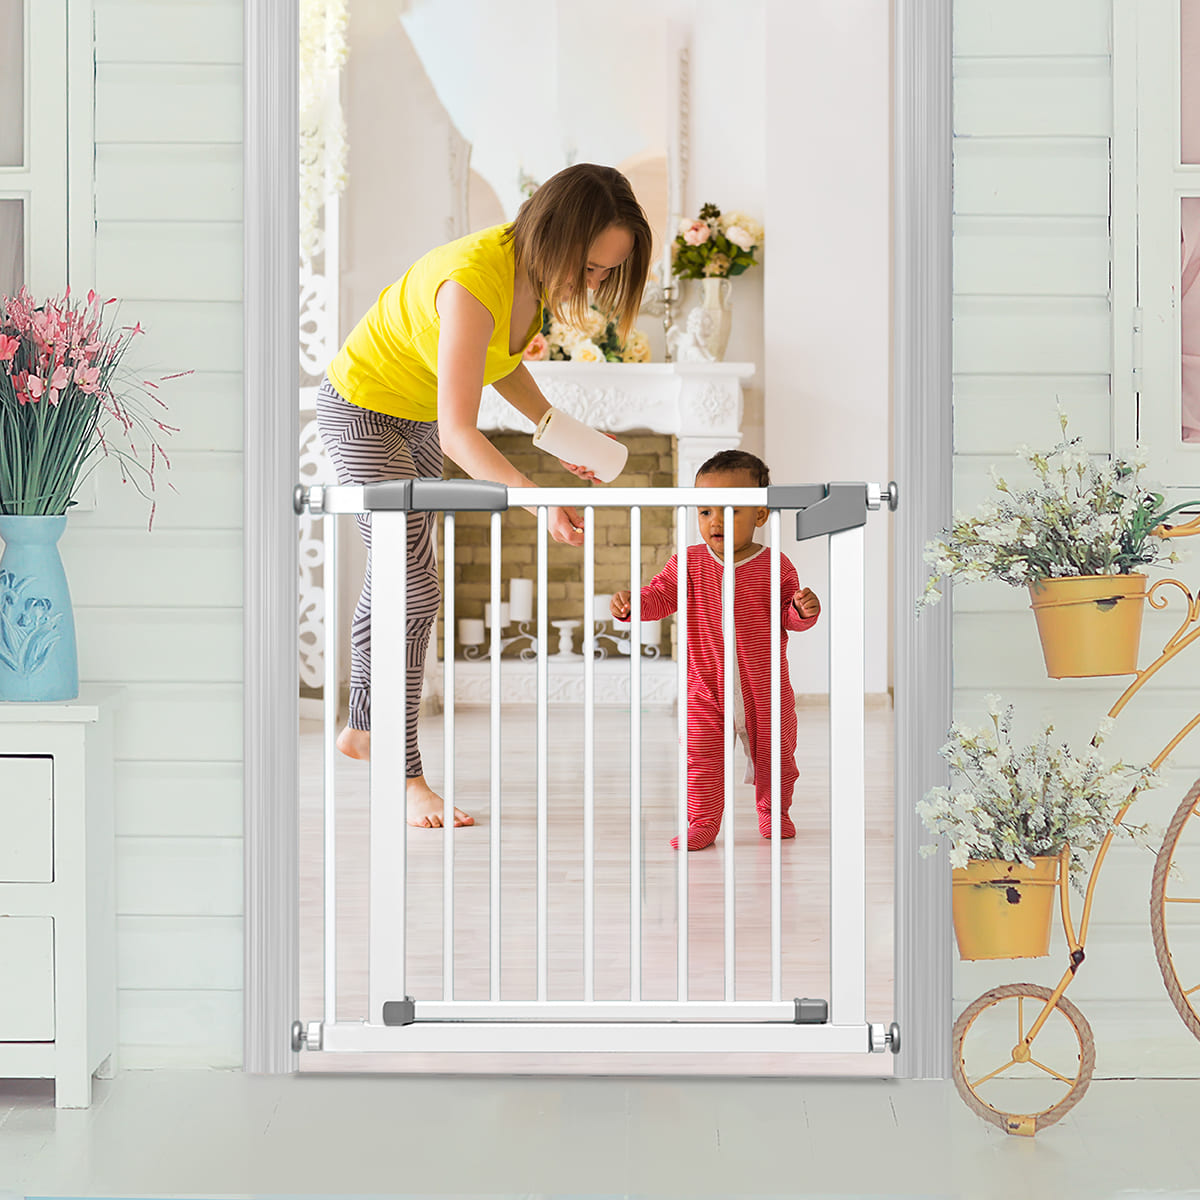 StarAndDaisy Metal Doorways Baby Gate With Door Walk Through Easy Step No Need Tools No Drilling 83 by 90 cm White